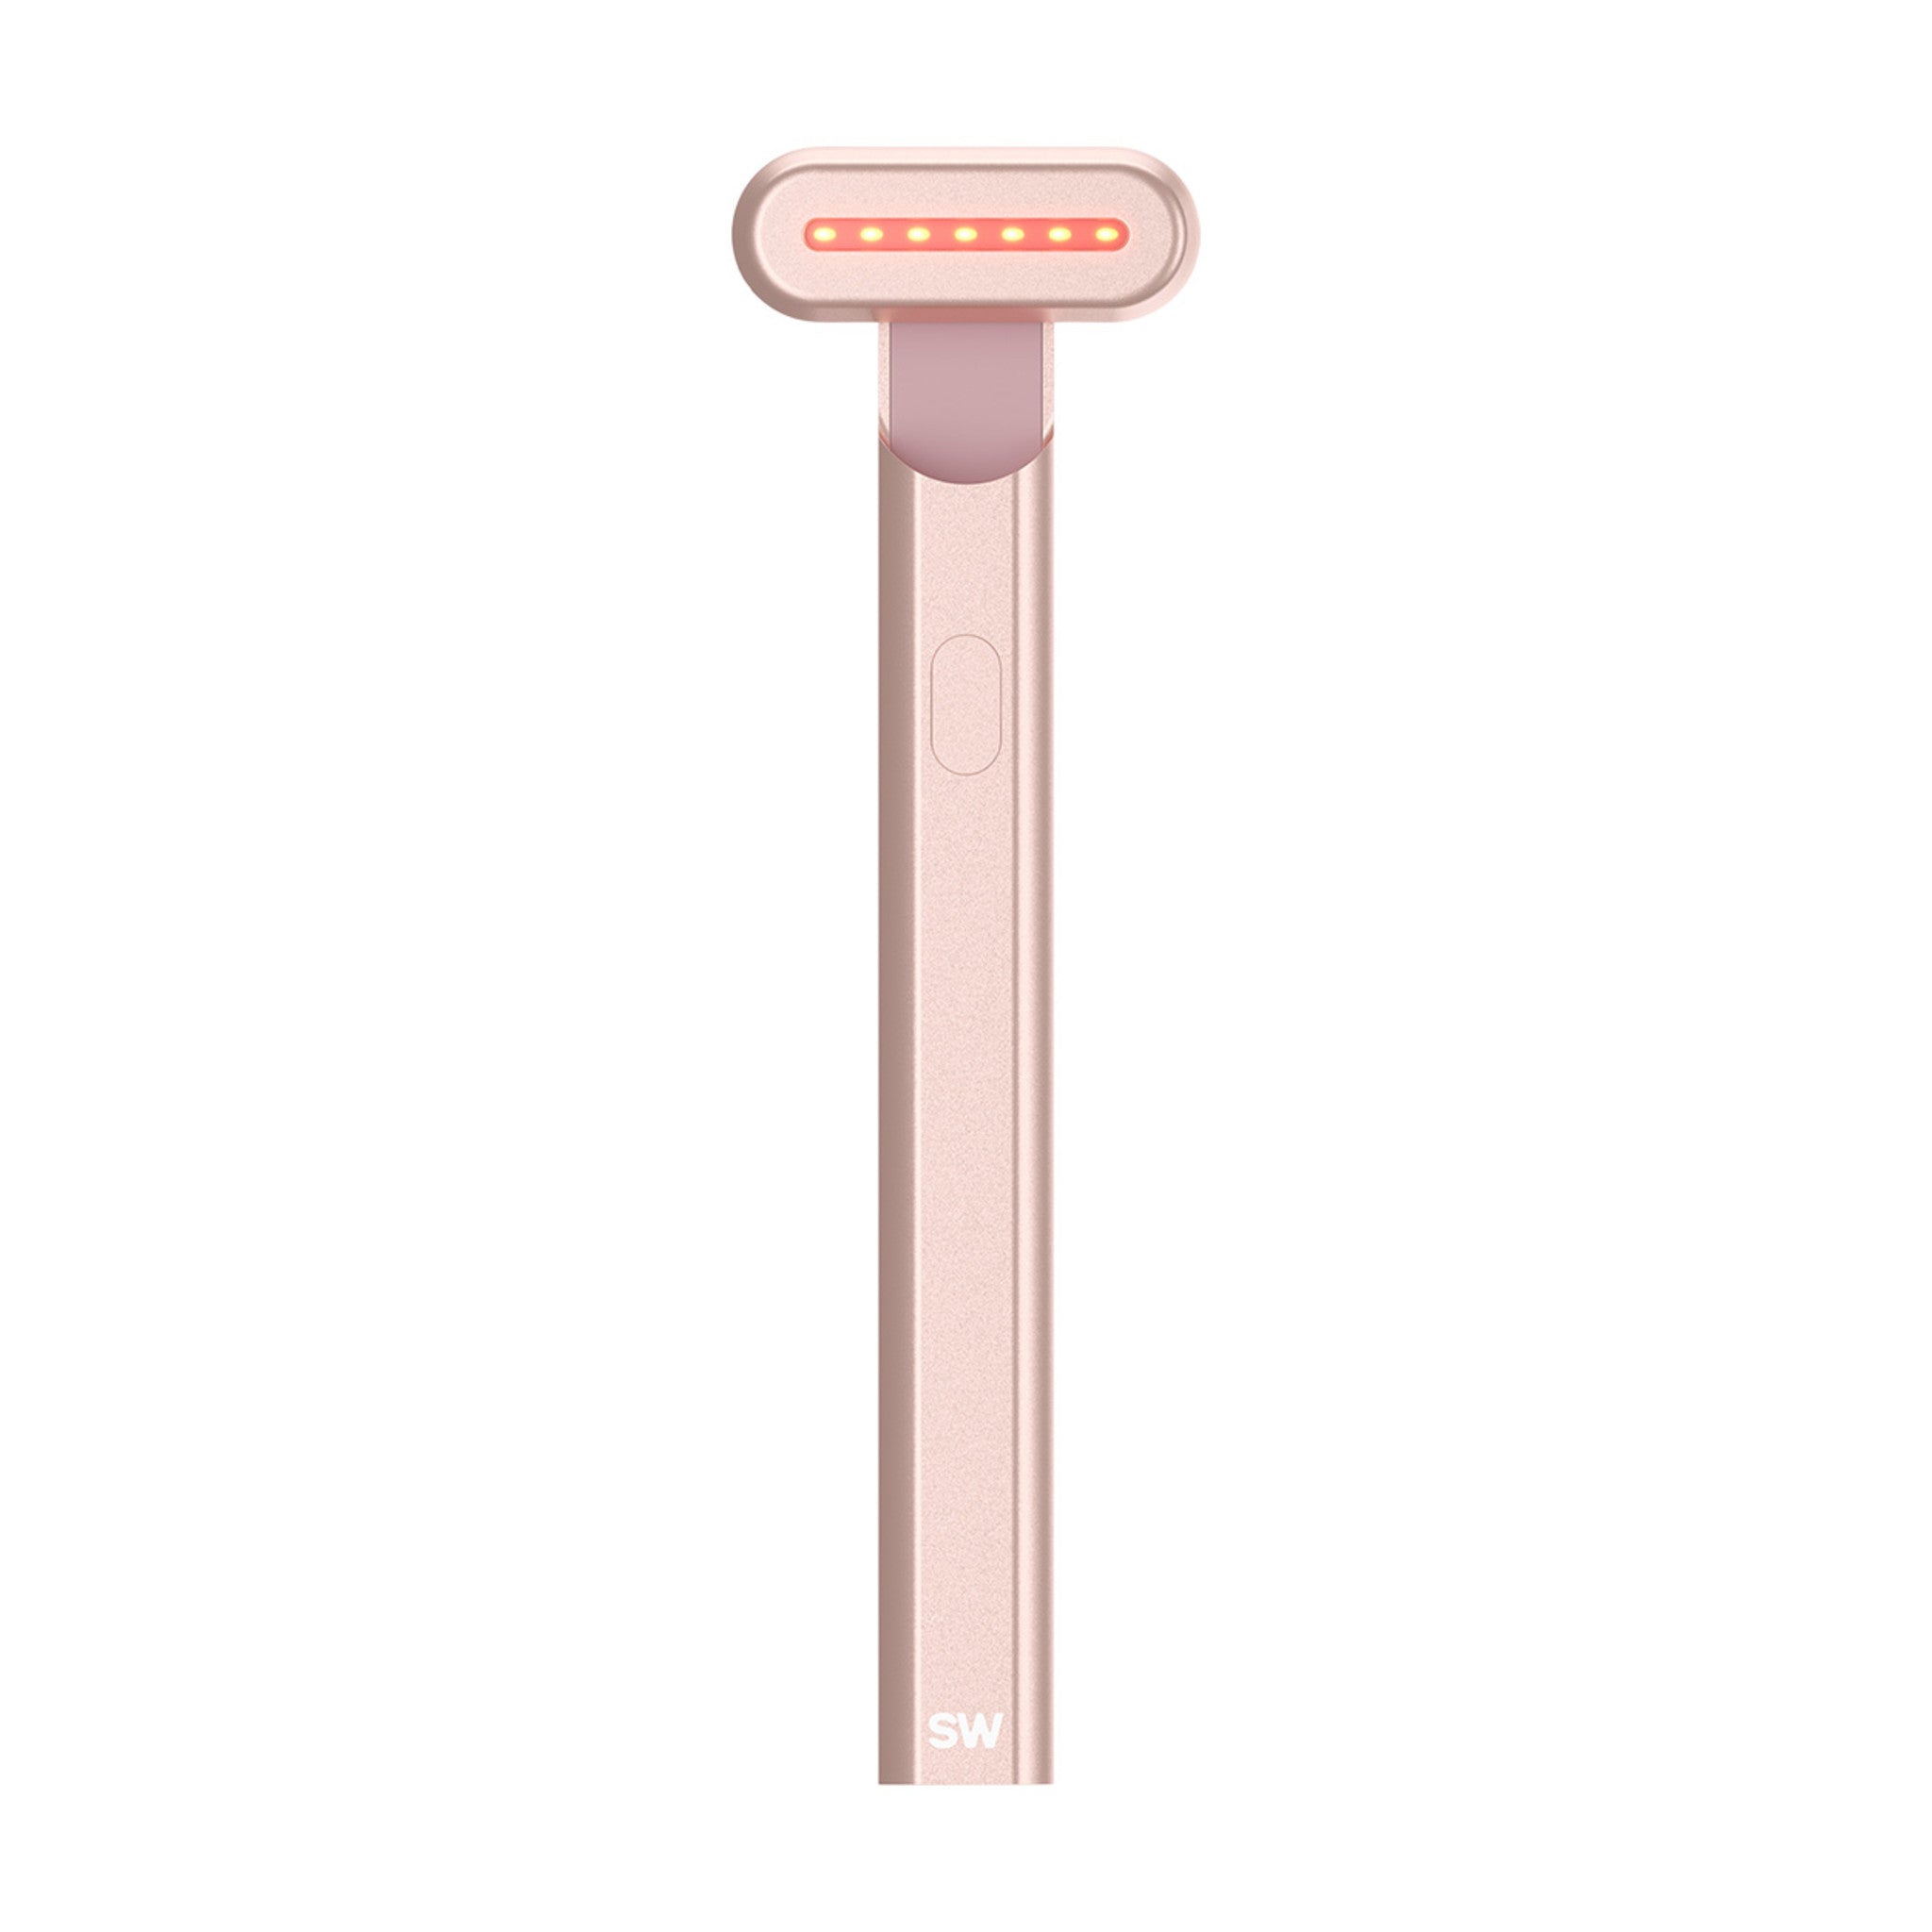 Solawave Advanced Skincare Wand With Red Light Therapy Color/Shade variant: Rose Gold main image.